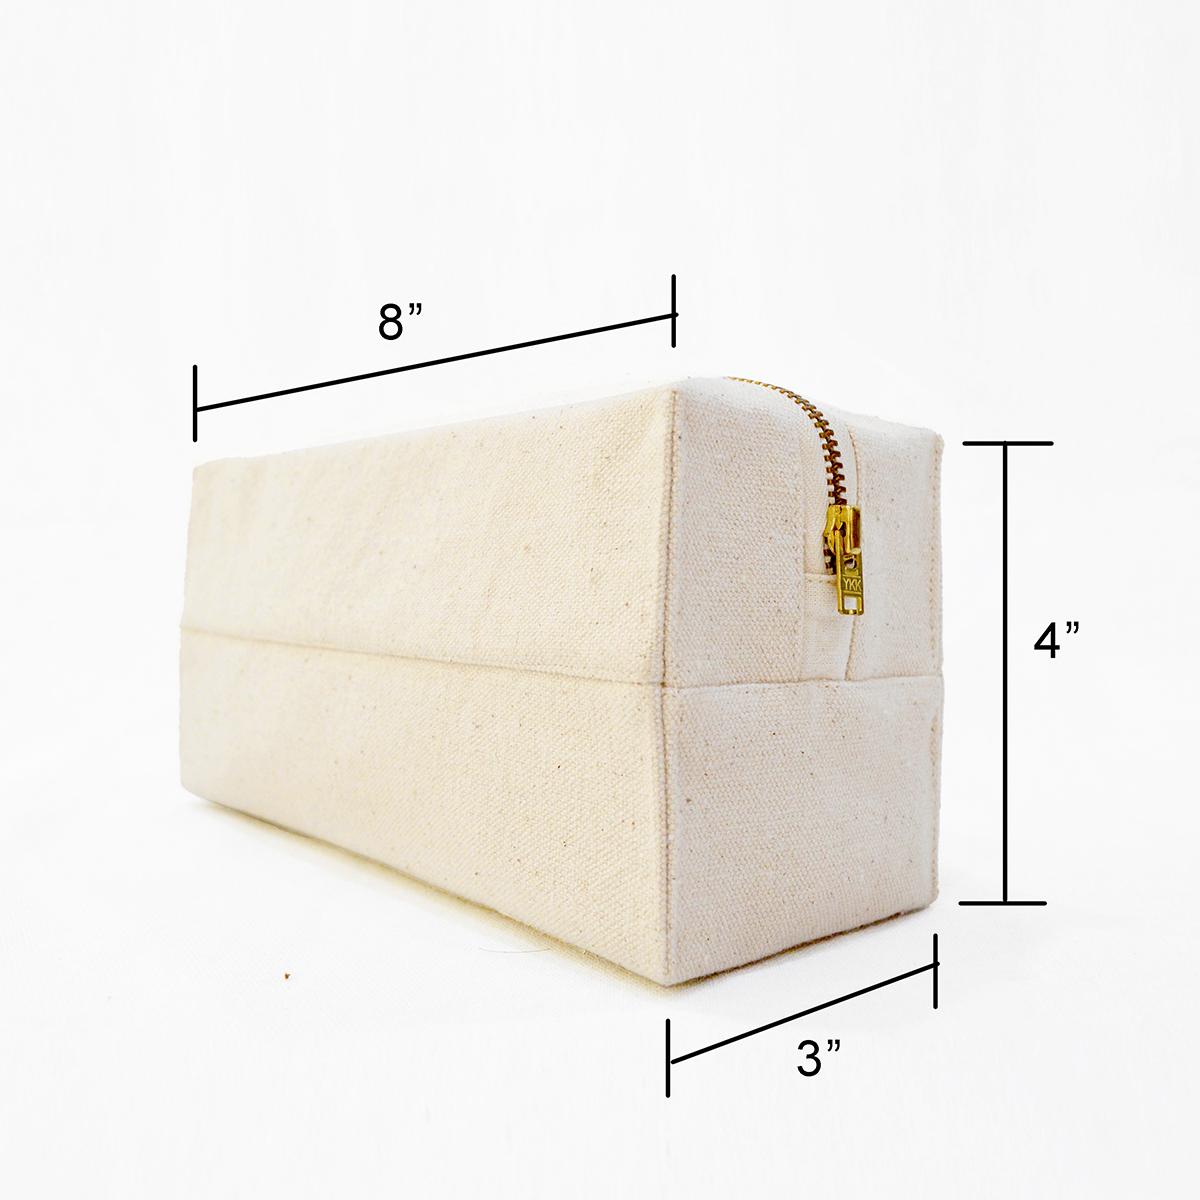 Home Essentials - Box bag available in various fabric options